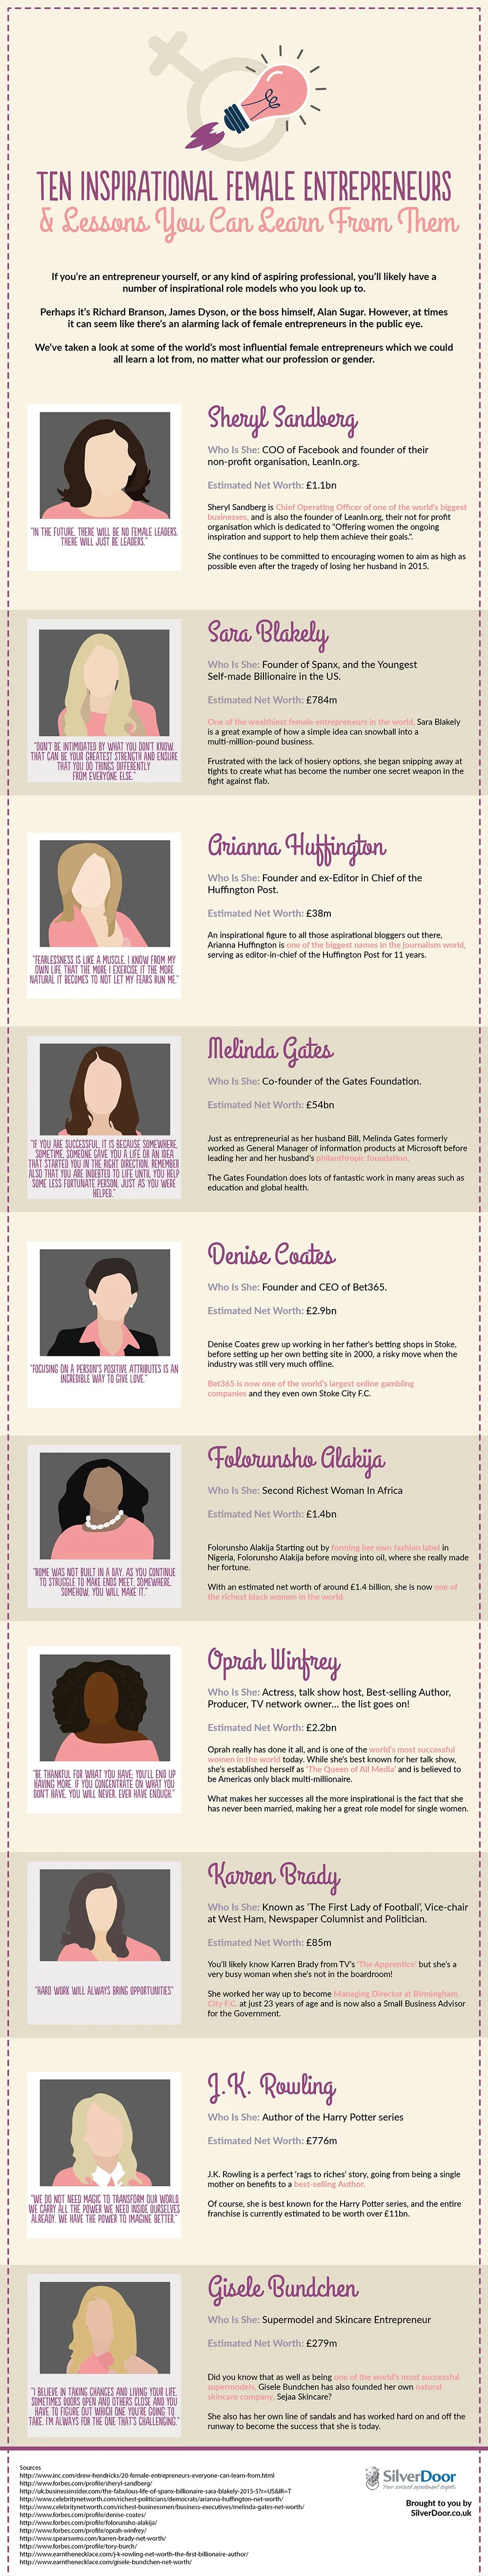 10 Inspirational Female Entrepreneurs & Lessons You Can Learn From Them - #Infographic